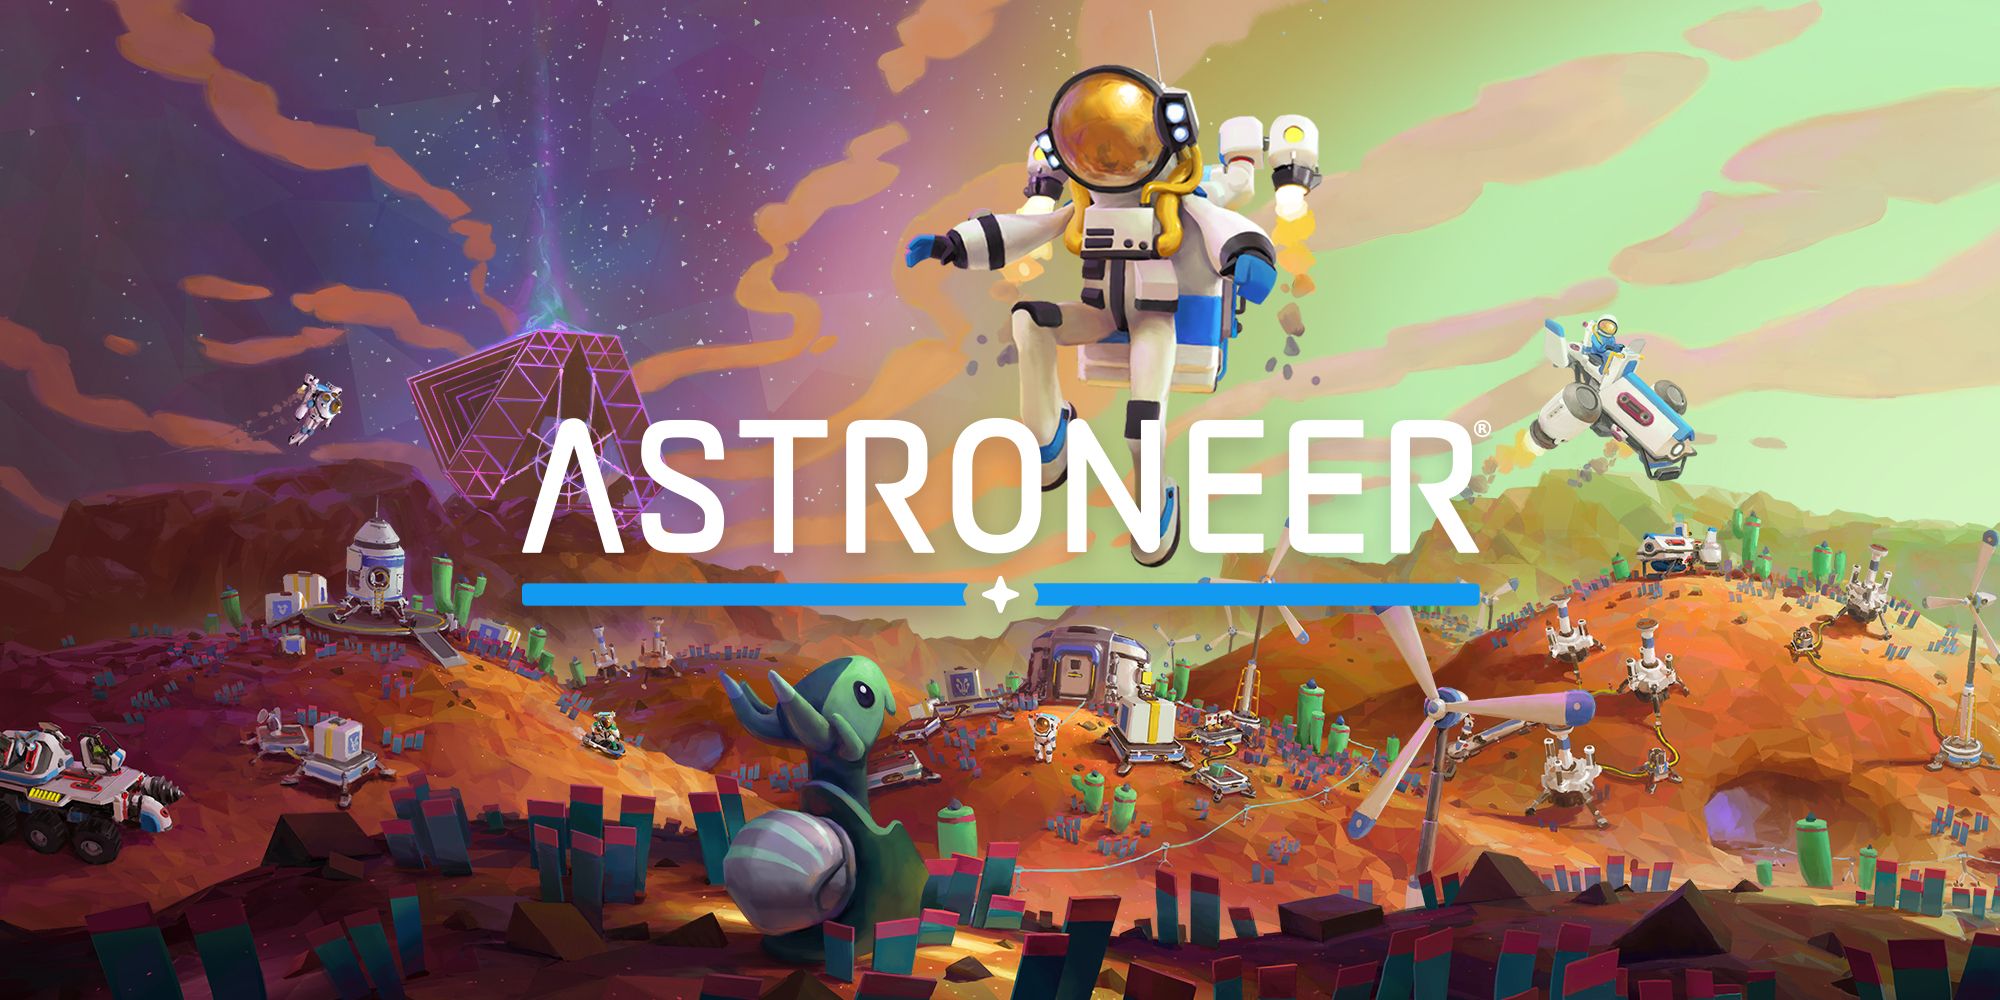 Astroneer Title Art Showing The Astronaut Descending On A World With Nature And Structures